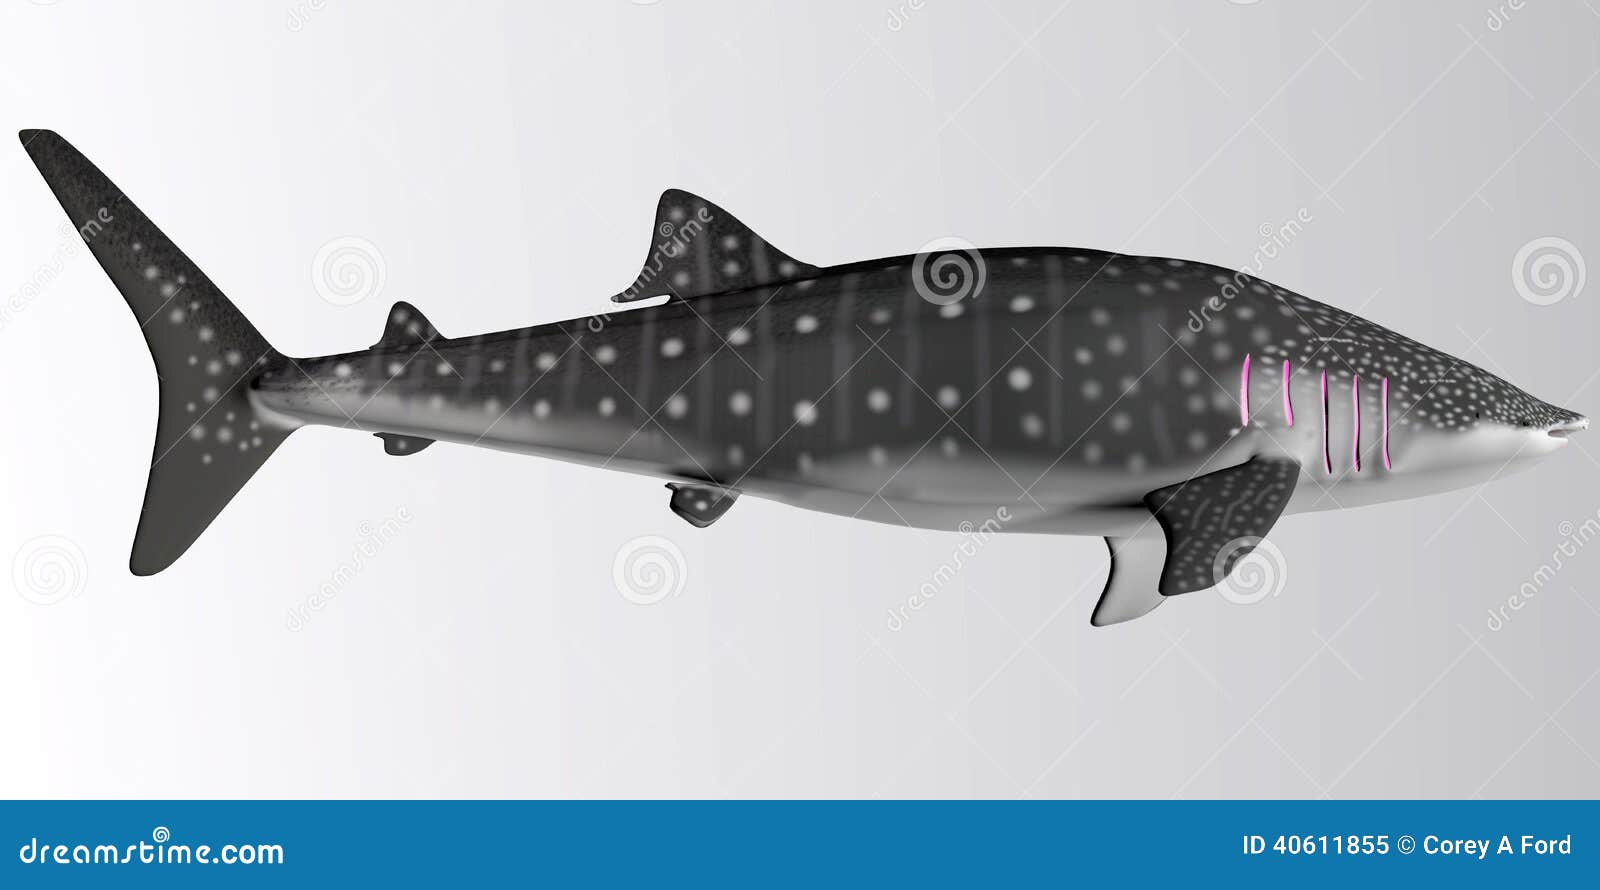 Whale Shark Side Profile stock image. Image of filter